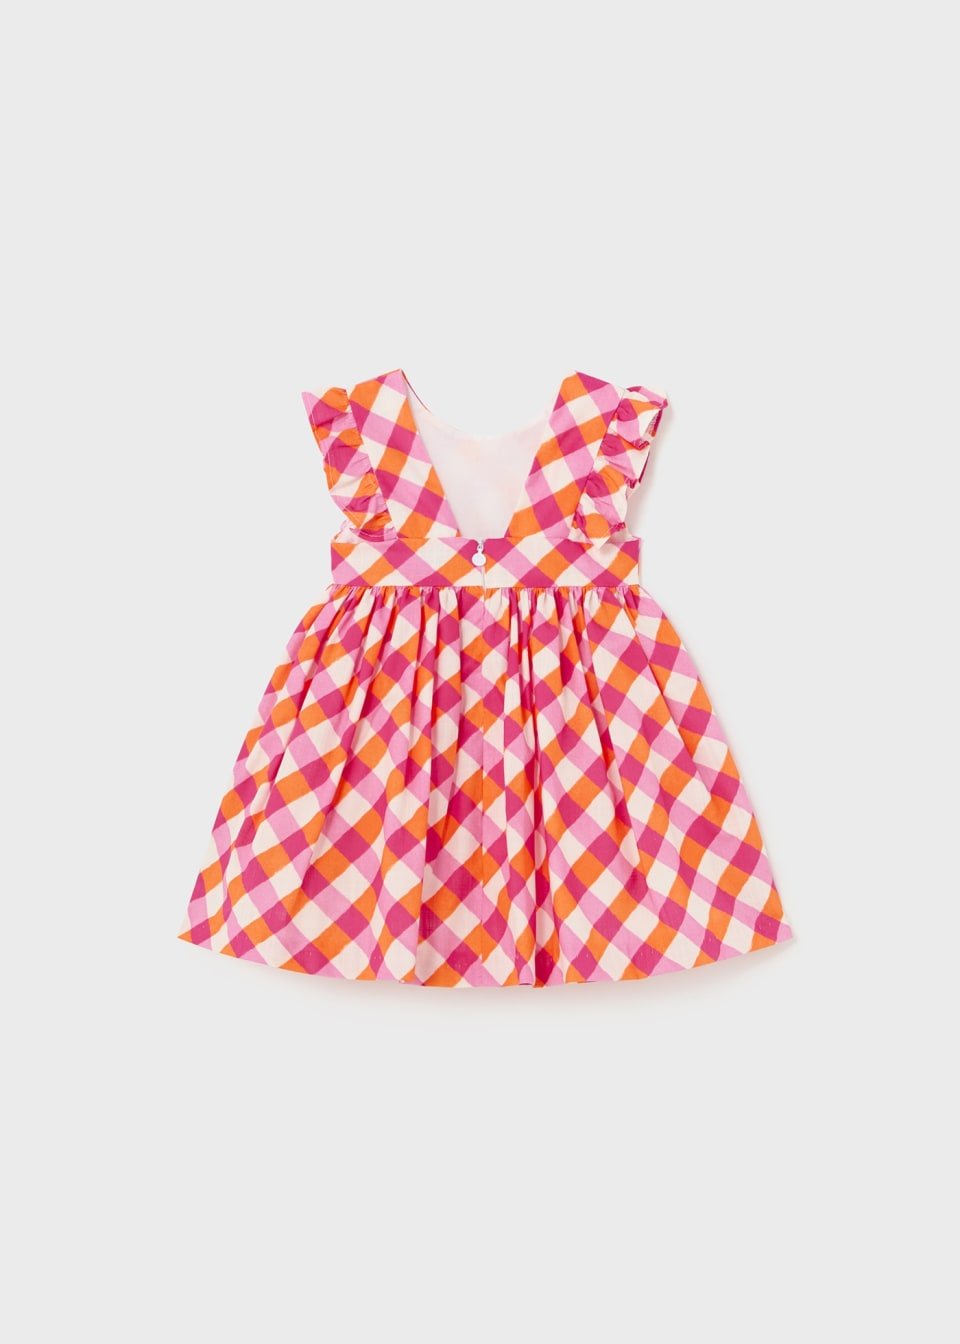 Girls' magenta/white/orange printed dress with delicate bow. - The Village Retail